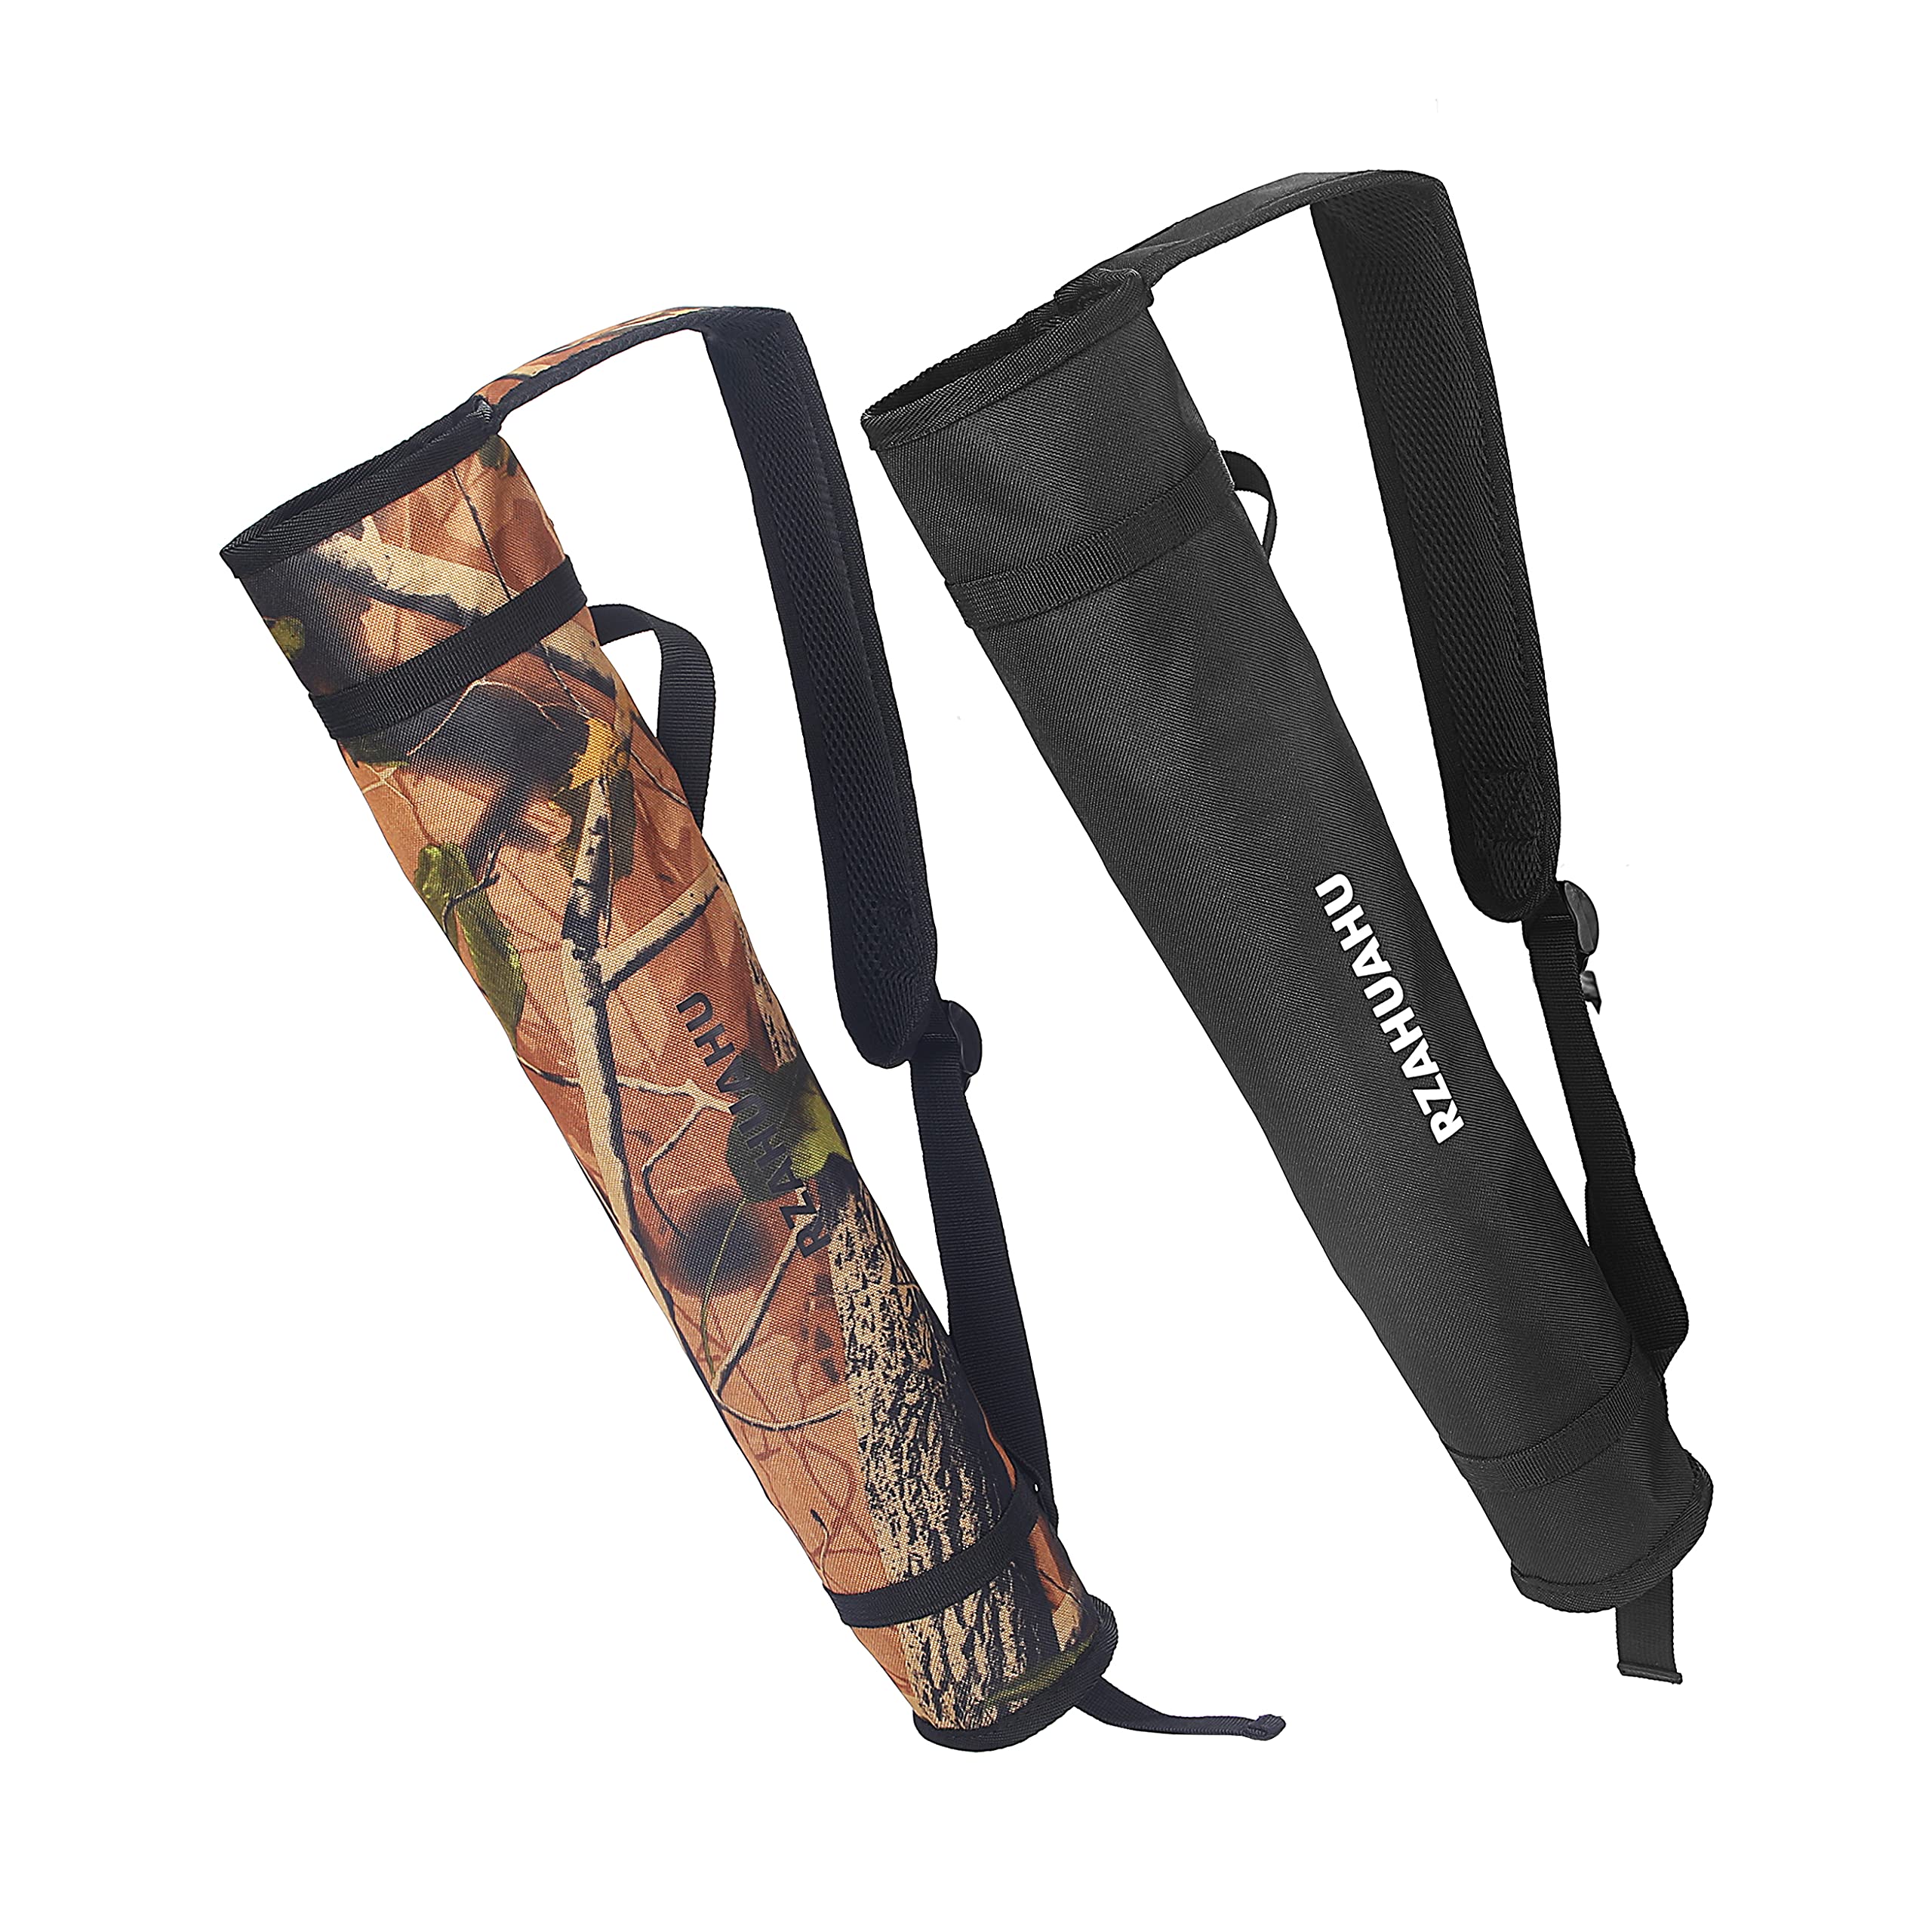 Adjustable Archery Quiver 4 Tubes Quiver for Archery Hunting Arrows Holder  Bag with Adjustable Strap hunting accessories